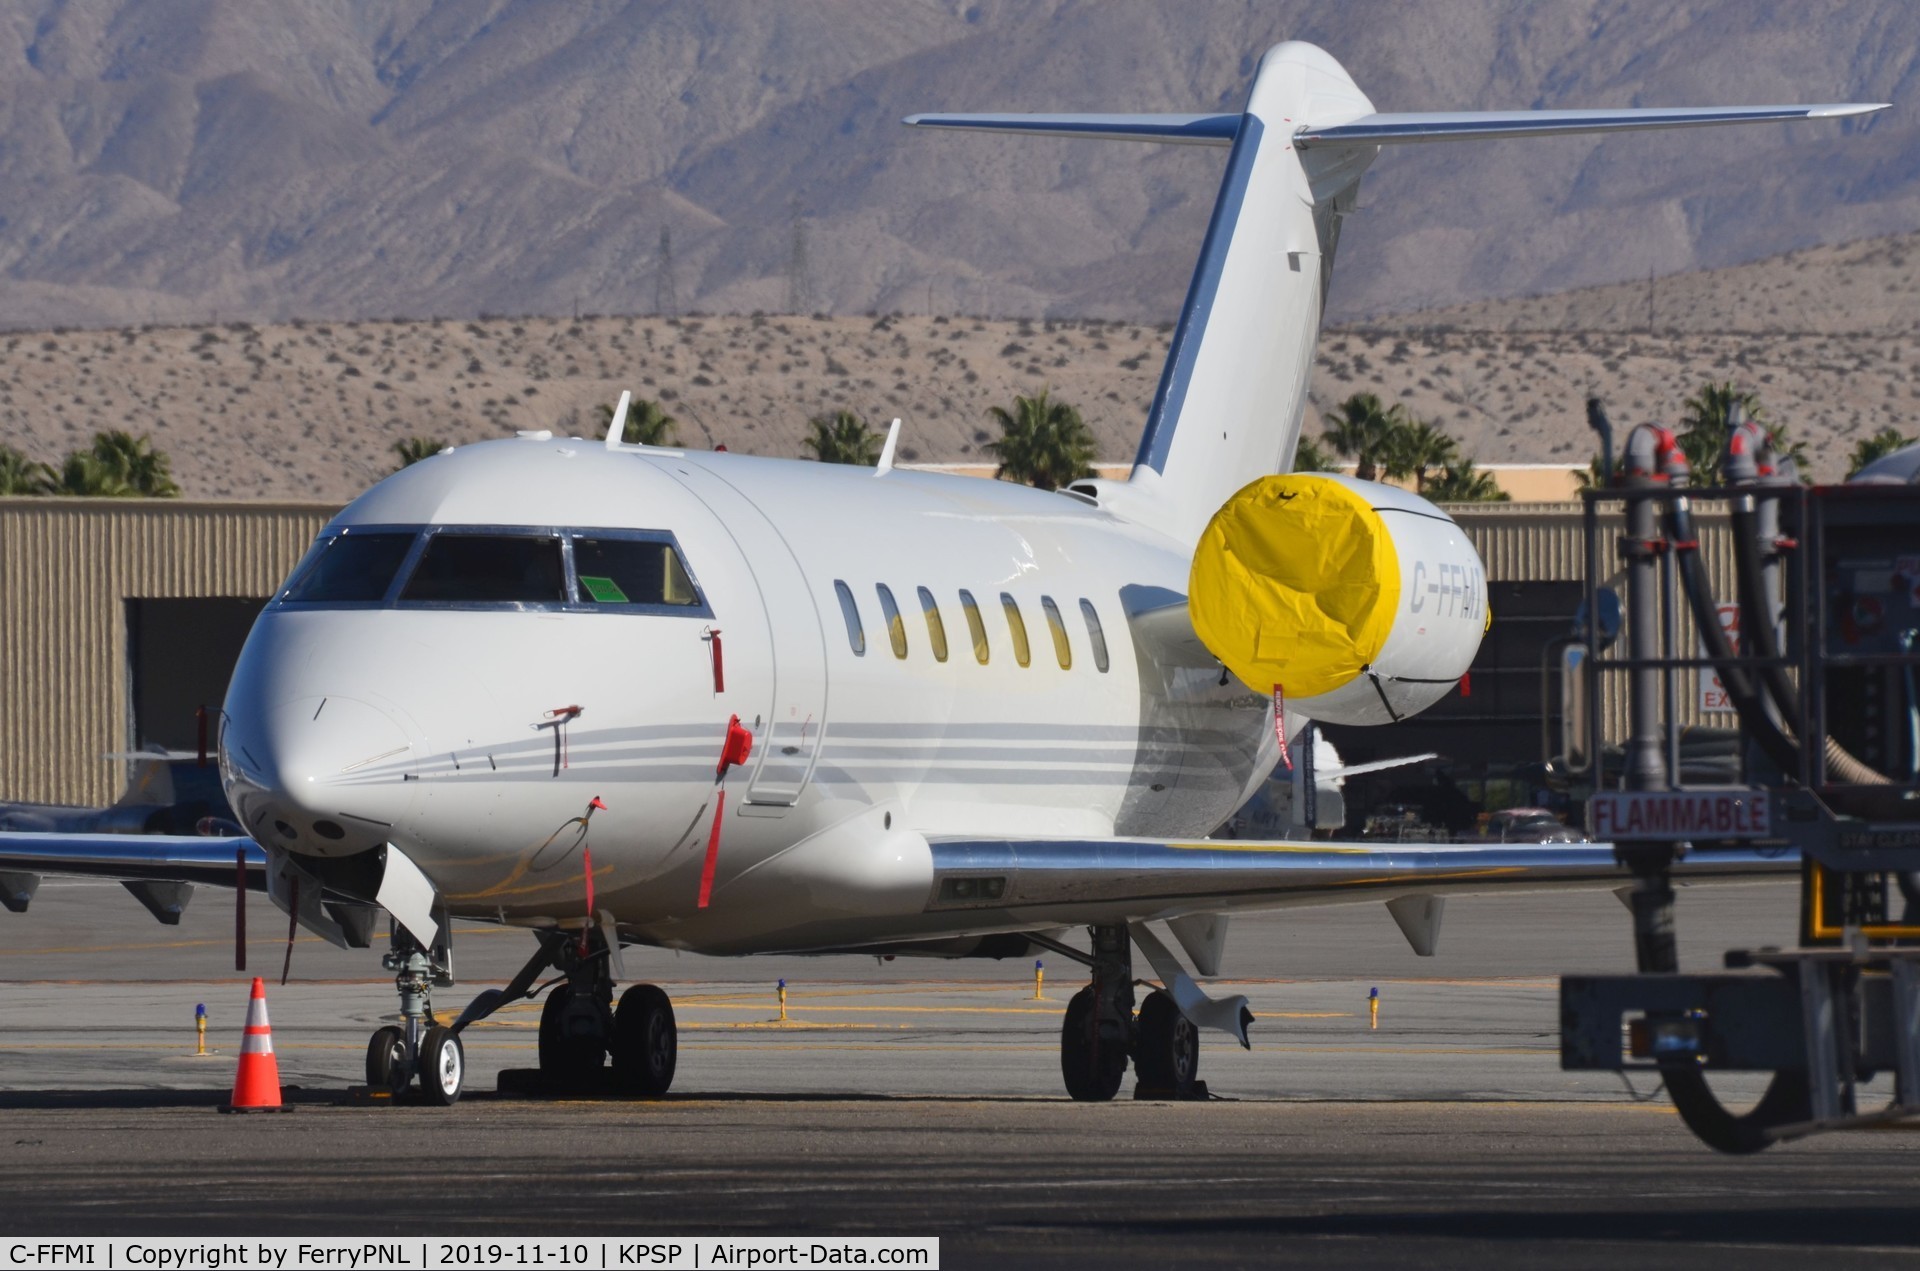 C-FFMI, 2019 Bombardier Challenger 650 C/N 6137, CL650 parked in PSP